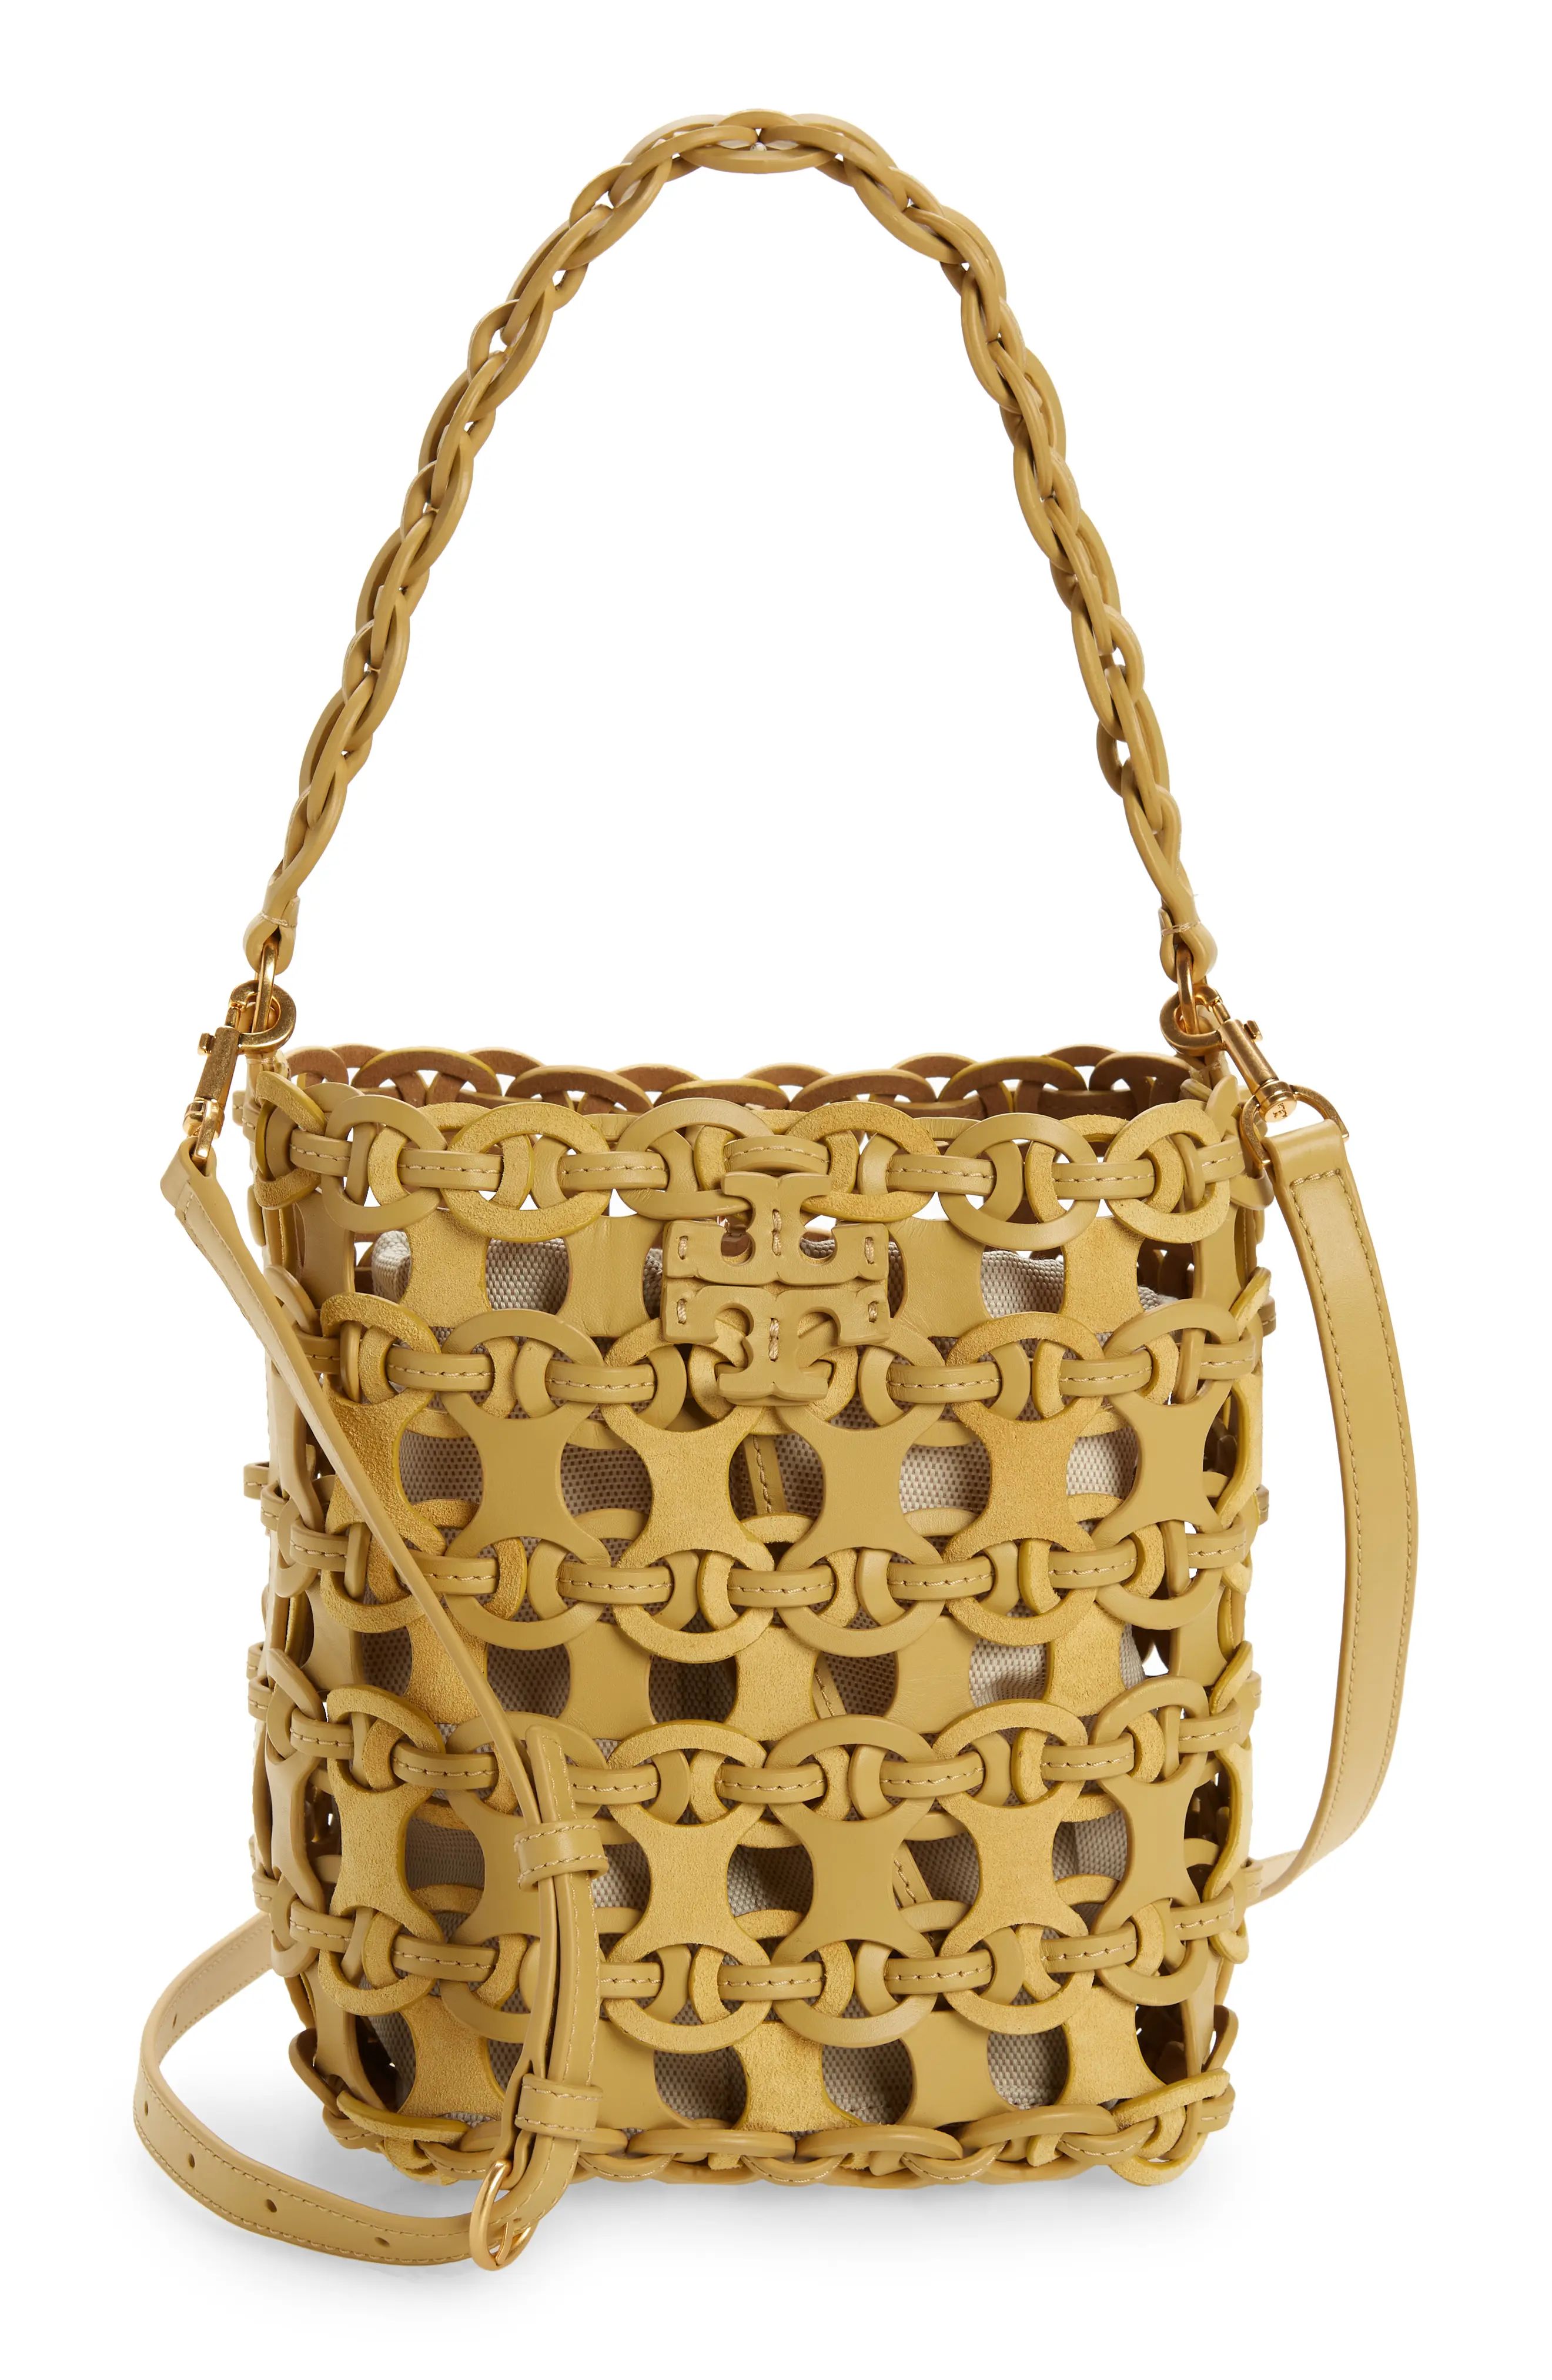 Tory Burch McGraw Small Woven Leather Bucket Bag in Beeswax at Nordstrom | Nordstrom